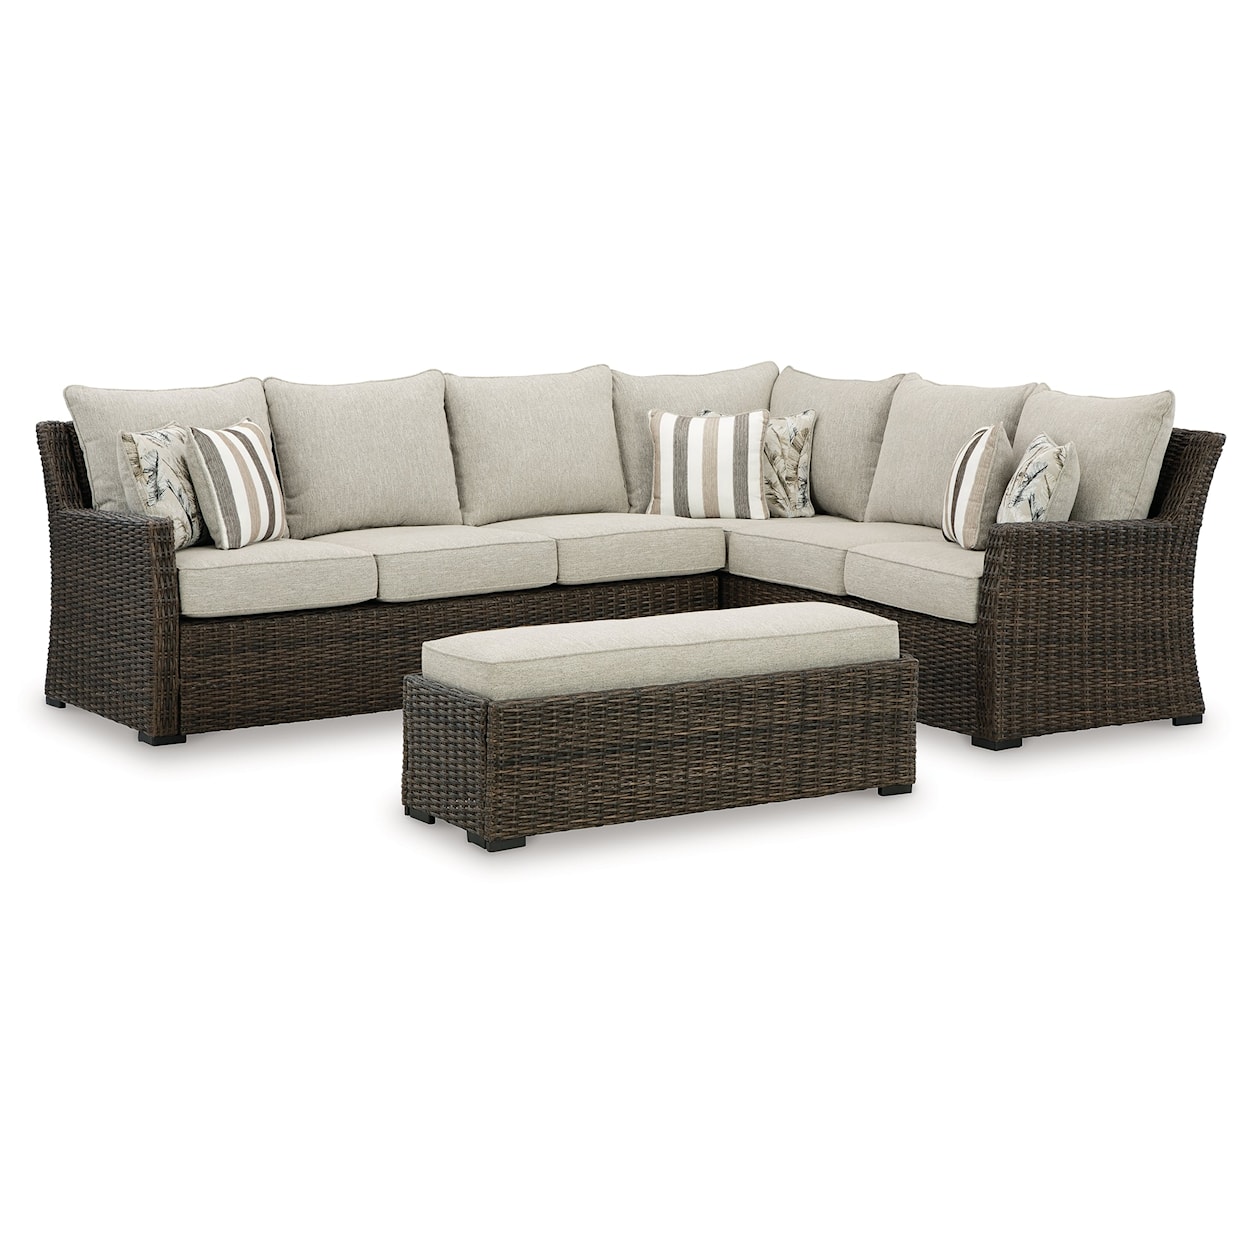 Benchcraft Brook Ranch Sofa Sectional/Bench Set